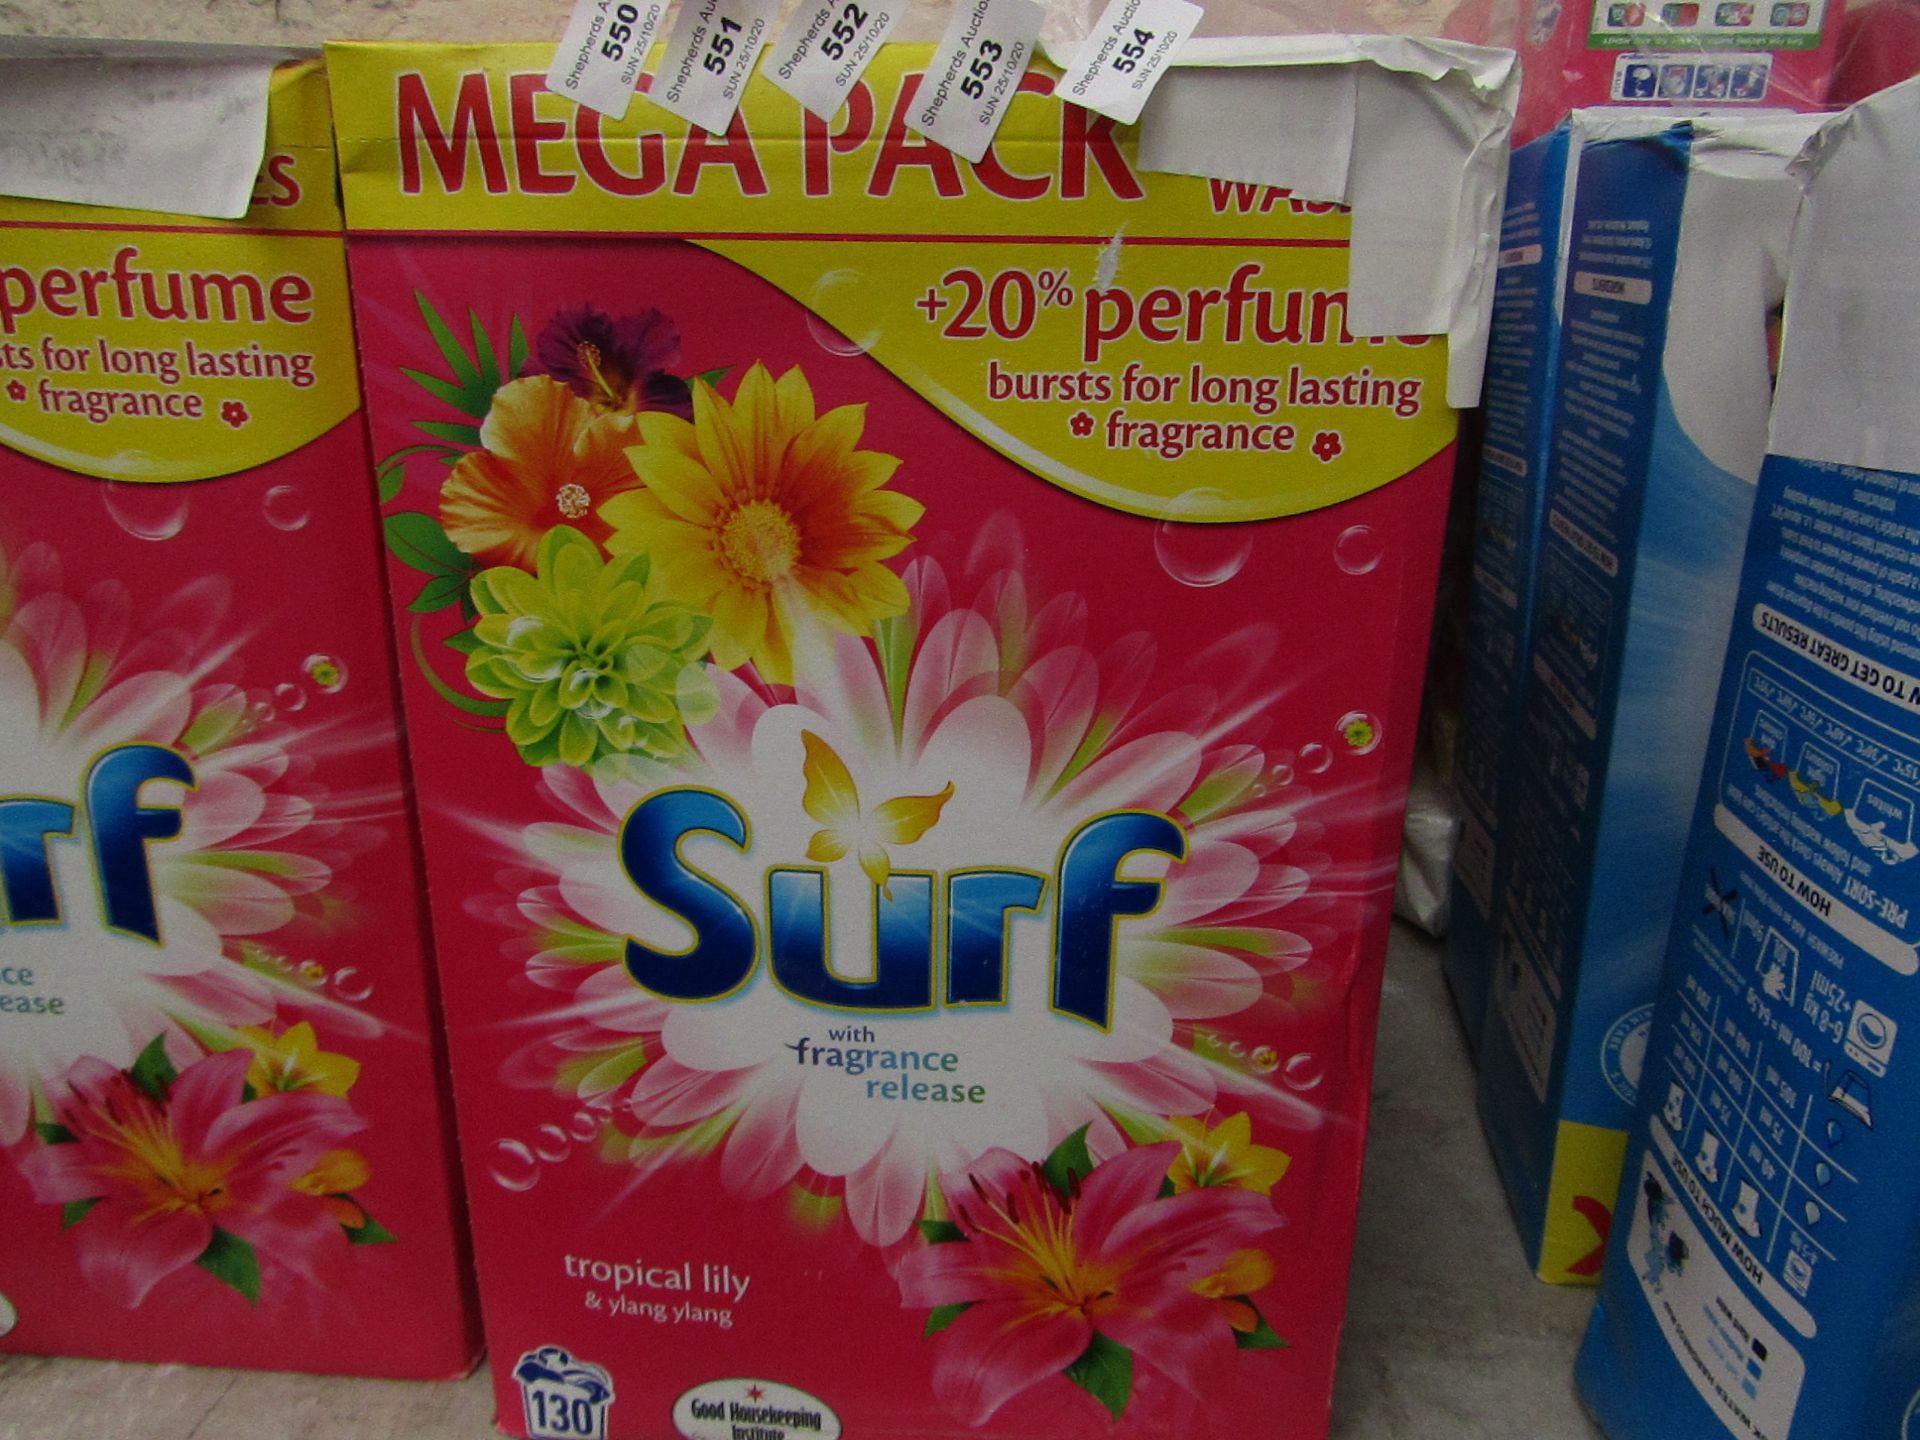 Mega 130 wash box ofSurf with fragrance release washing powder, has been damaged and resealed, still